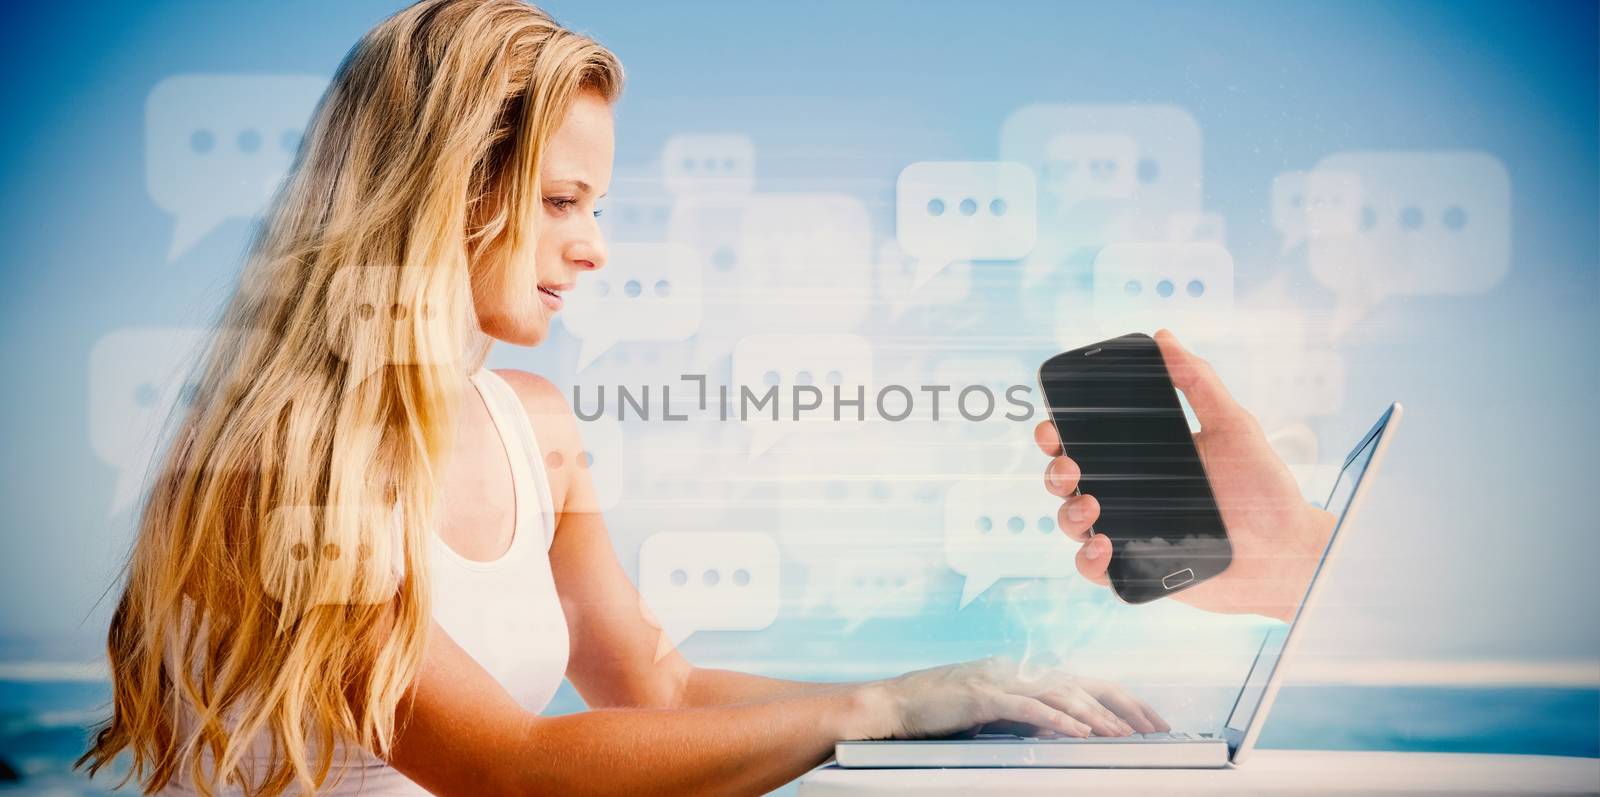 Composite image of pretty blonde using her laptop at the beach with hand holding phone